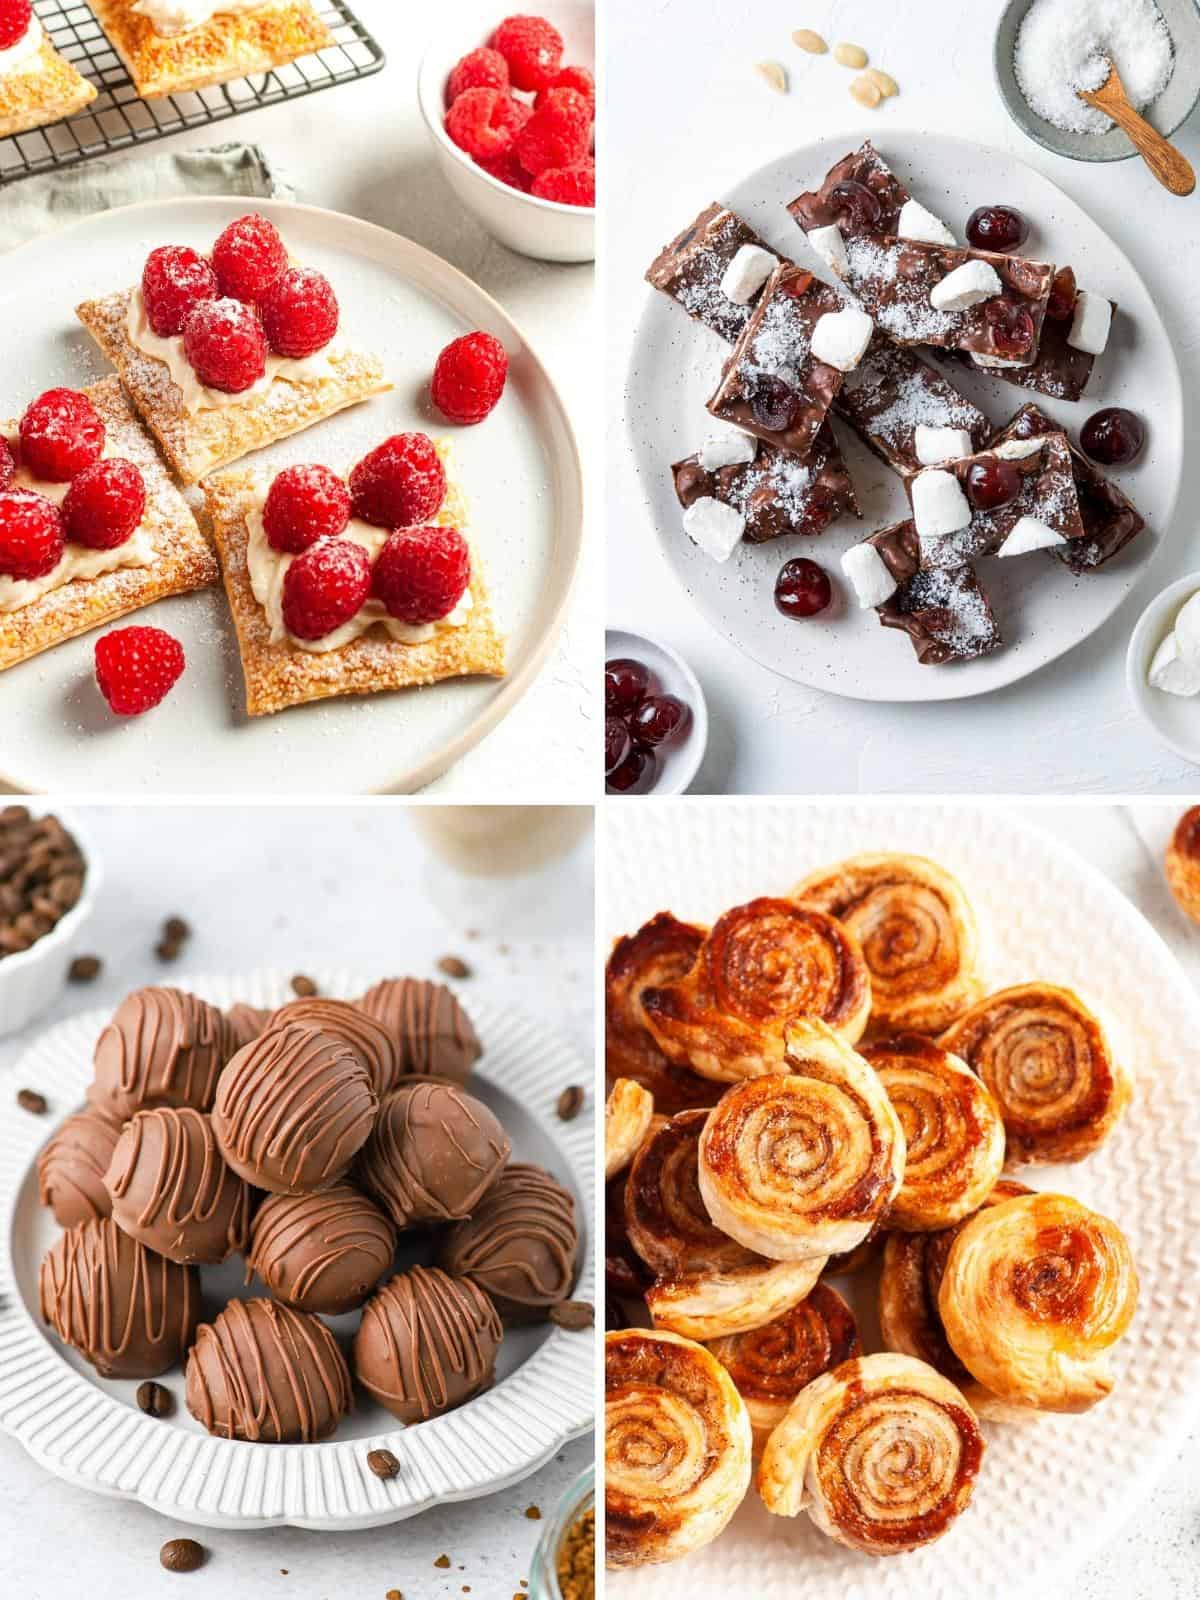 Four desserts in photo collage - raspberry tarts, rocky road, coffee truffles and cinnamon pinwheels.